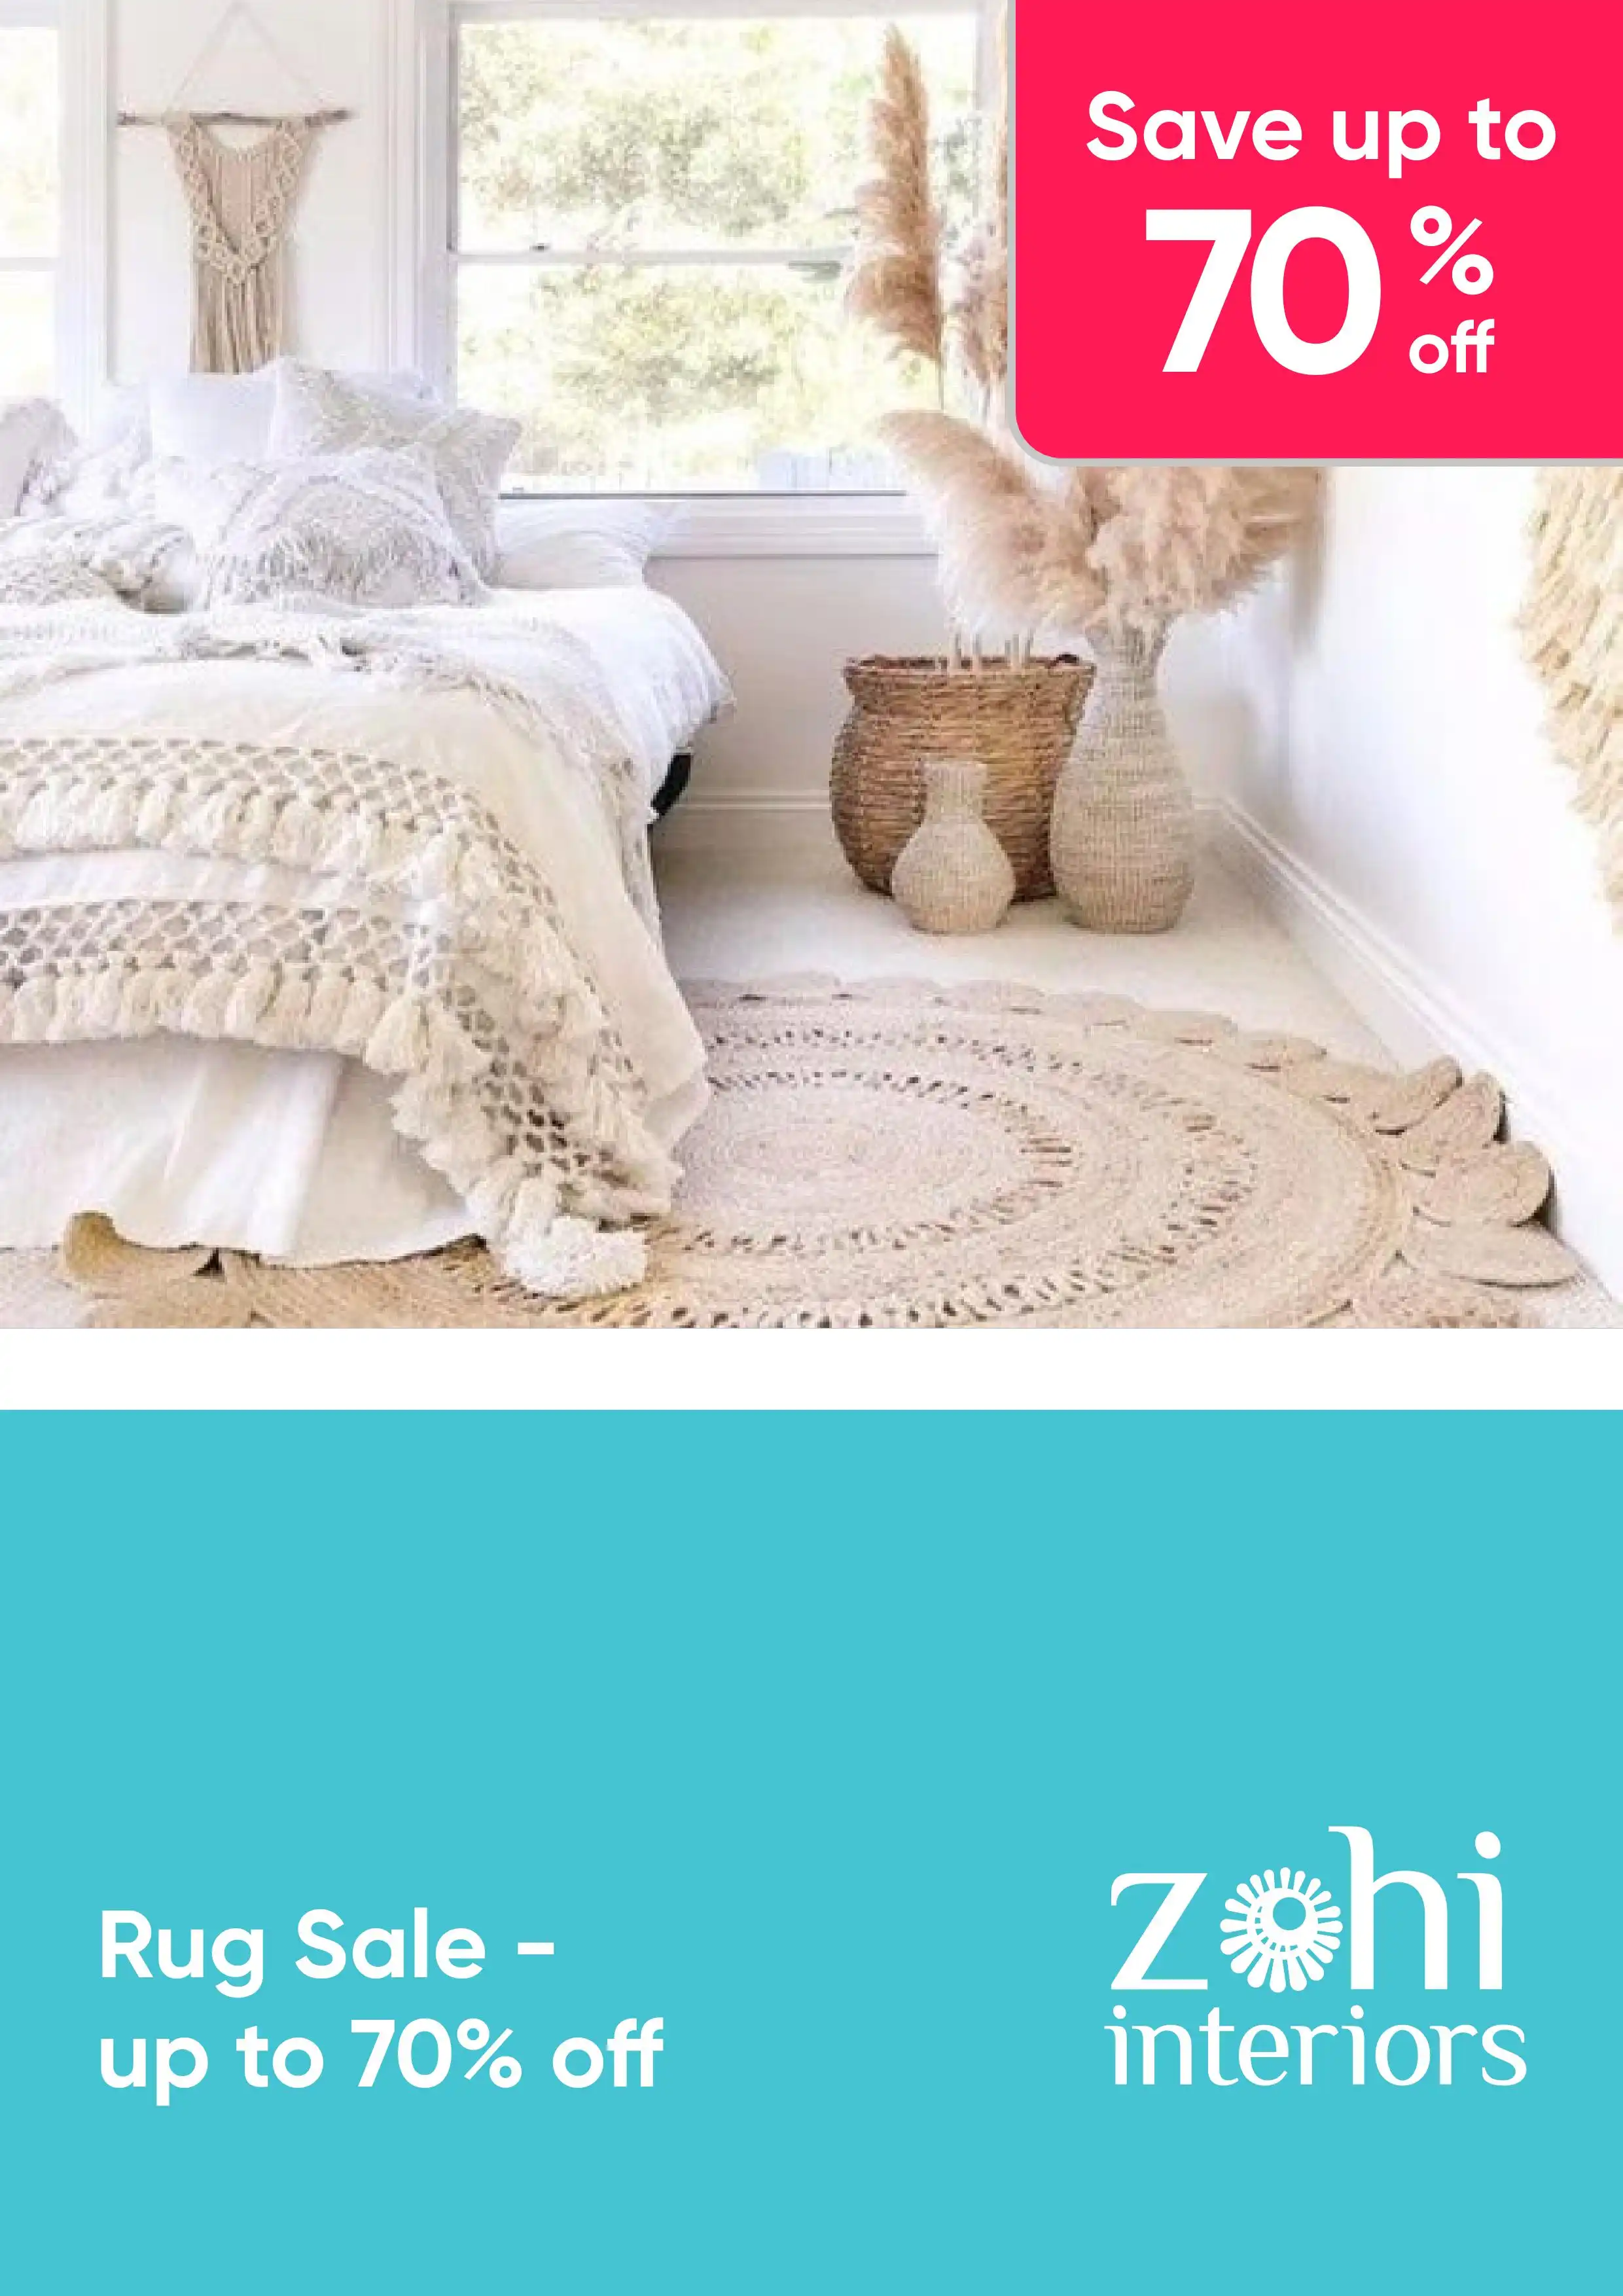 Rug Sale - up to 70% off